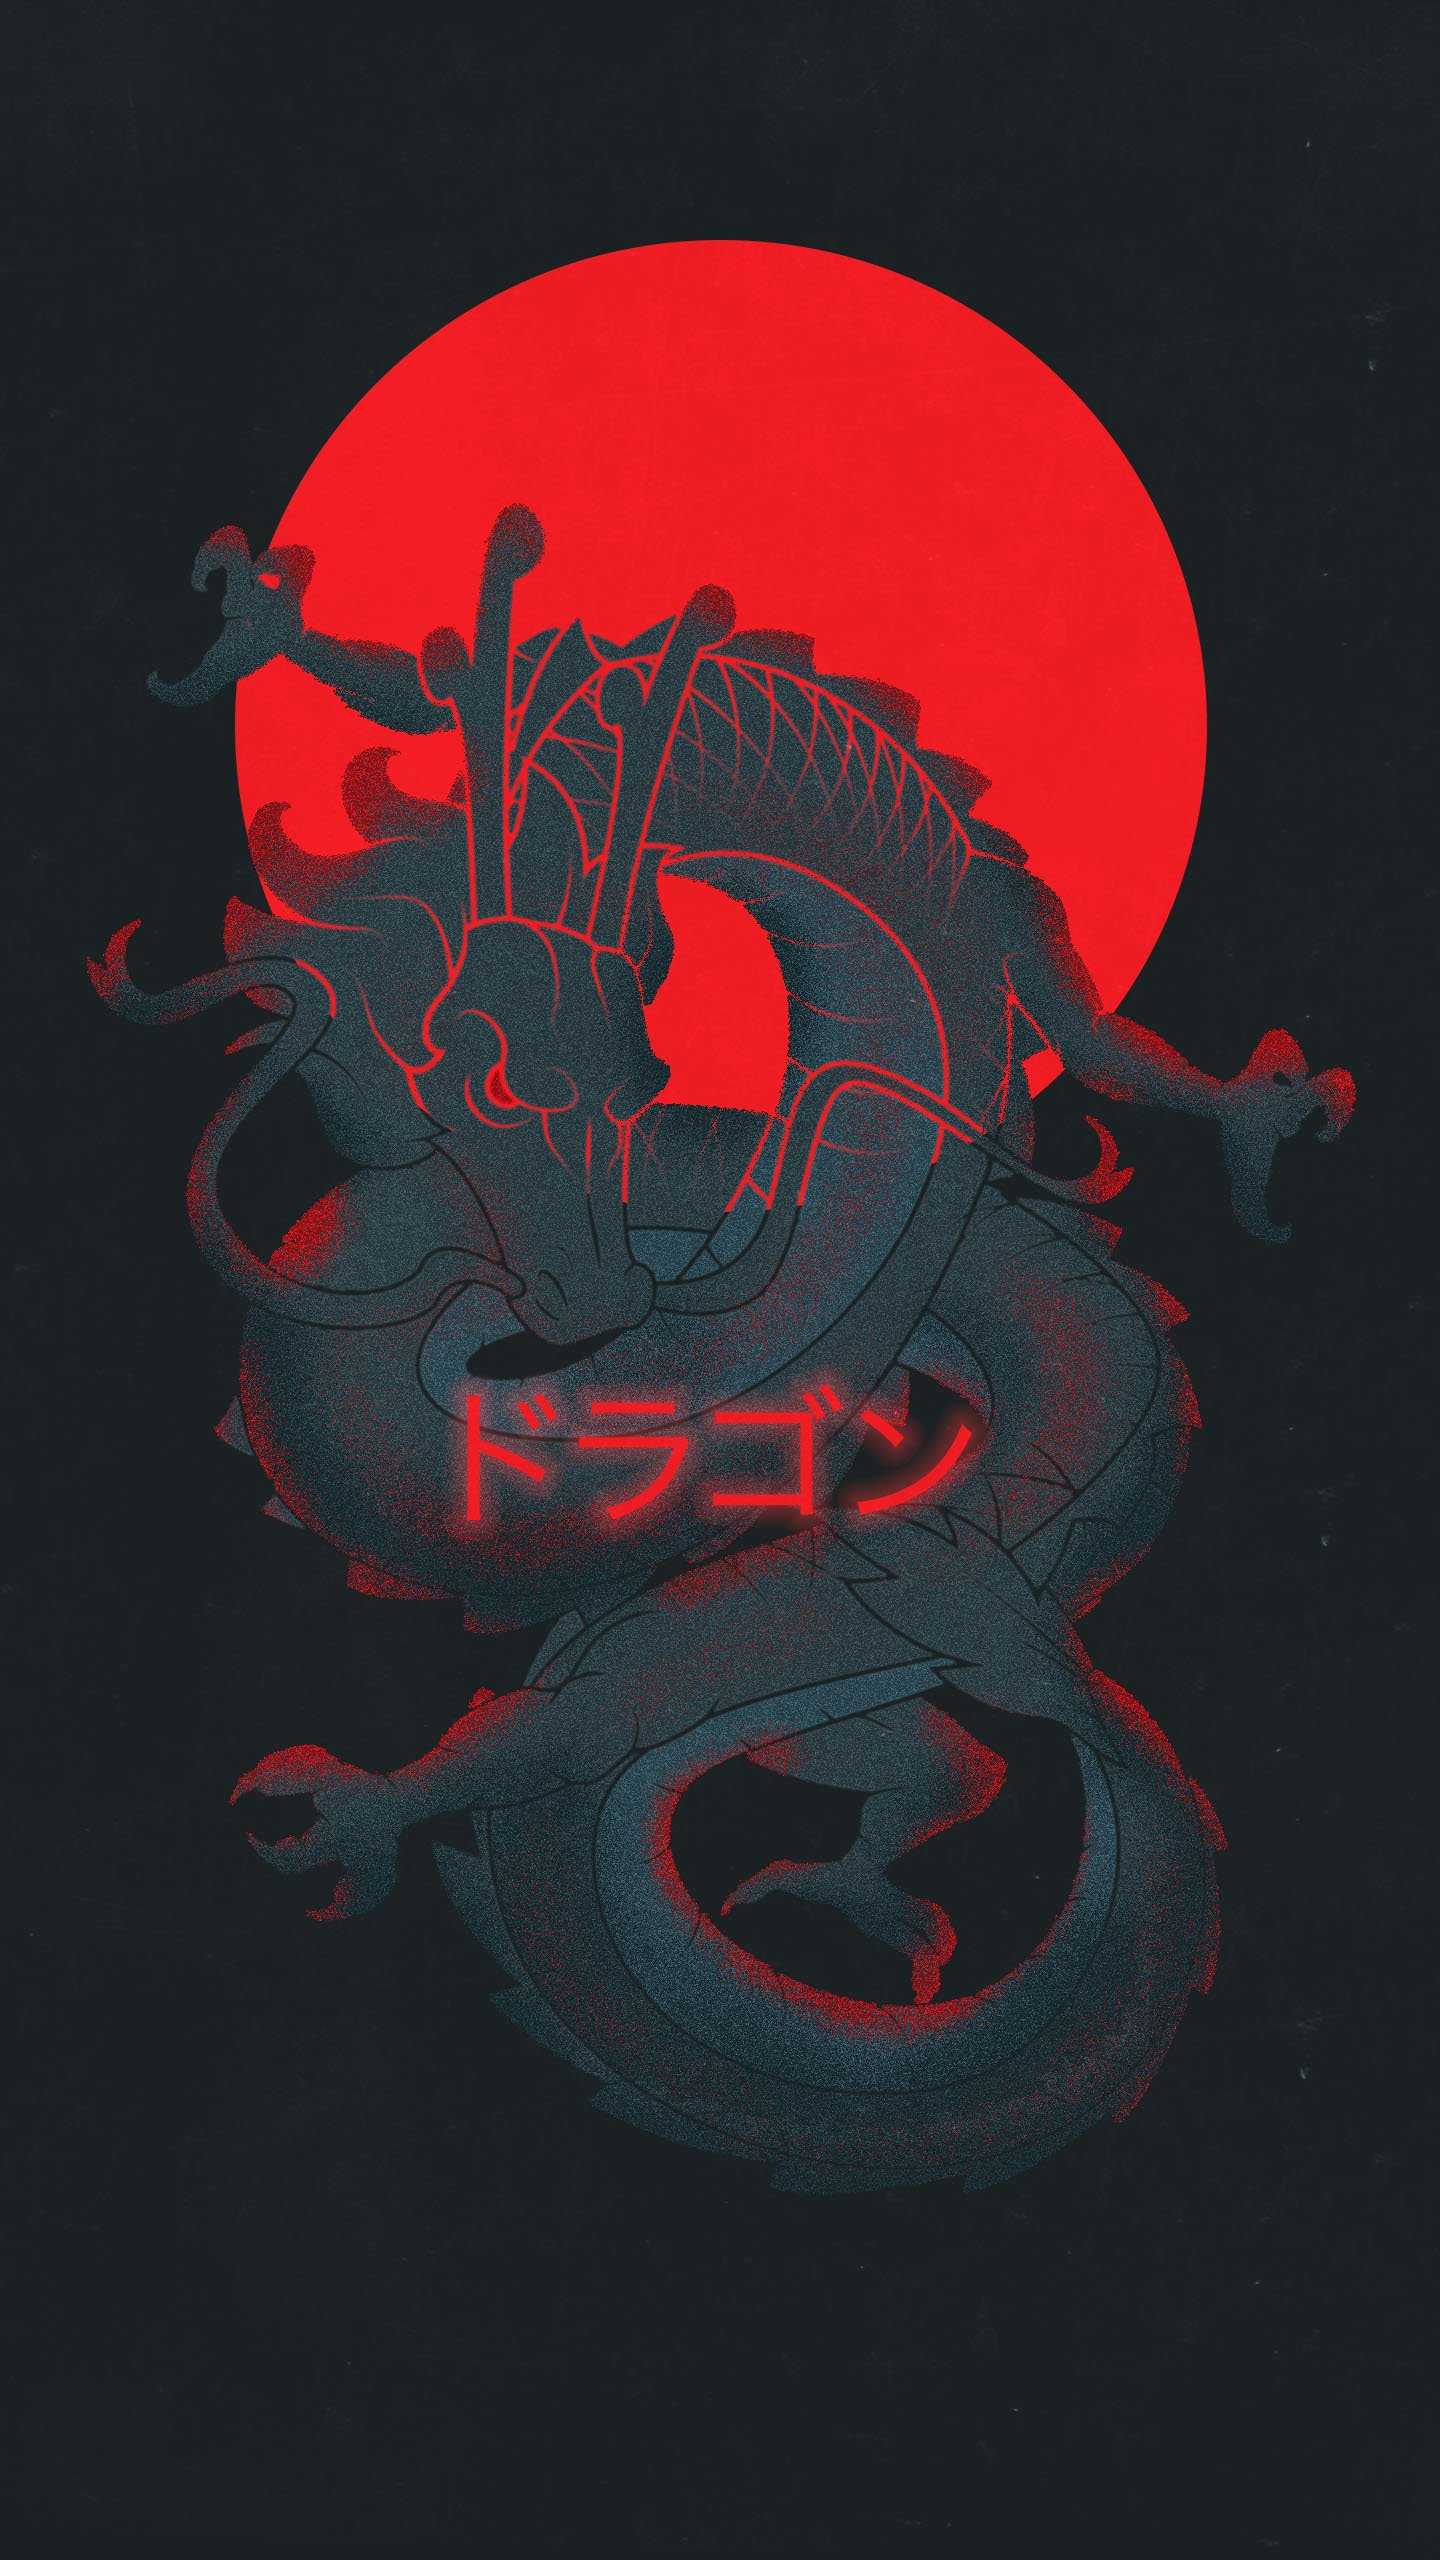 Aesthetic Red Dragon Phone Wallpaper with high-resolution 1080x1920 pixel. You can use this wallpaper for your iPhone 5, 6, 7, 8, X, XS, XR backgrounds, Mobile Screensaver, or iPad Lock Screen - Dragon